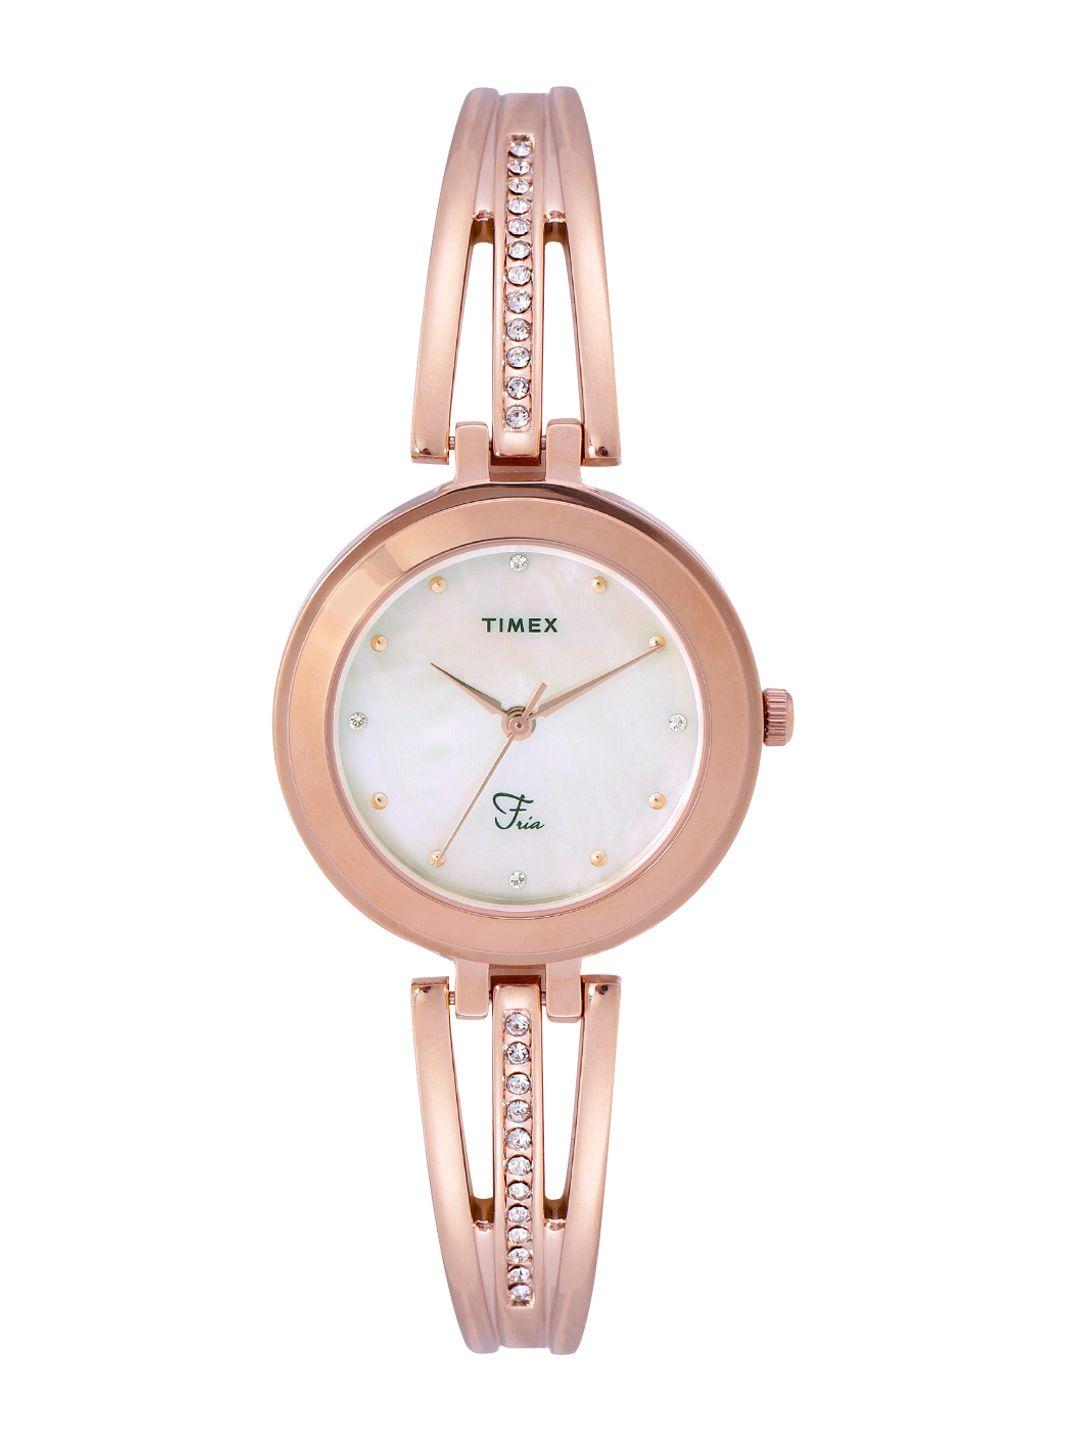 timex-women-brass-mother-of-pearl-dial-&-bracelet-style-straps-fria-analogue-watch--twtl103smu03